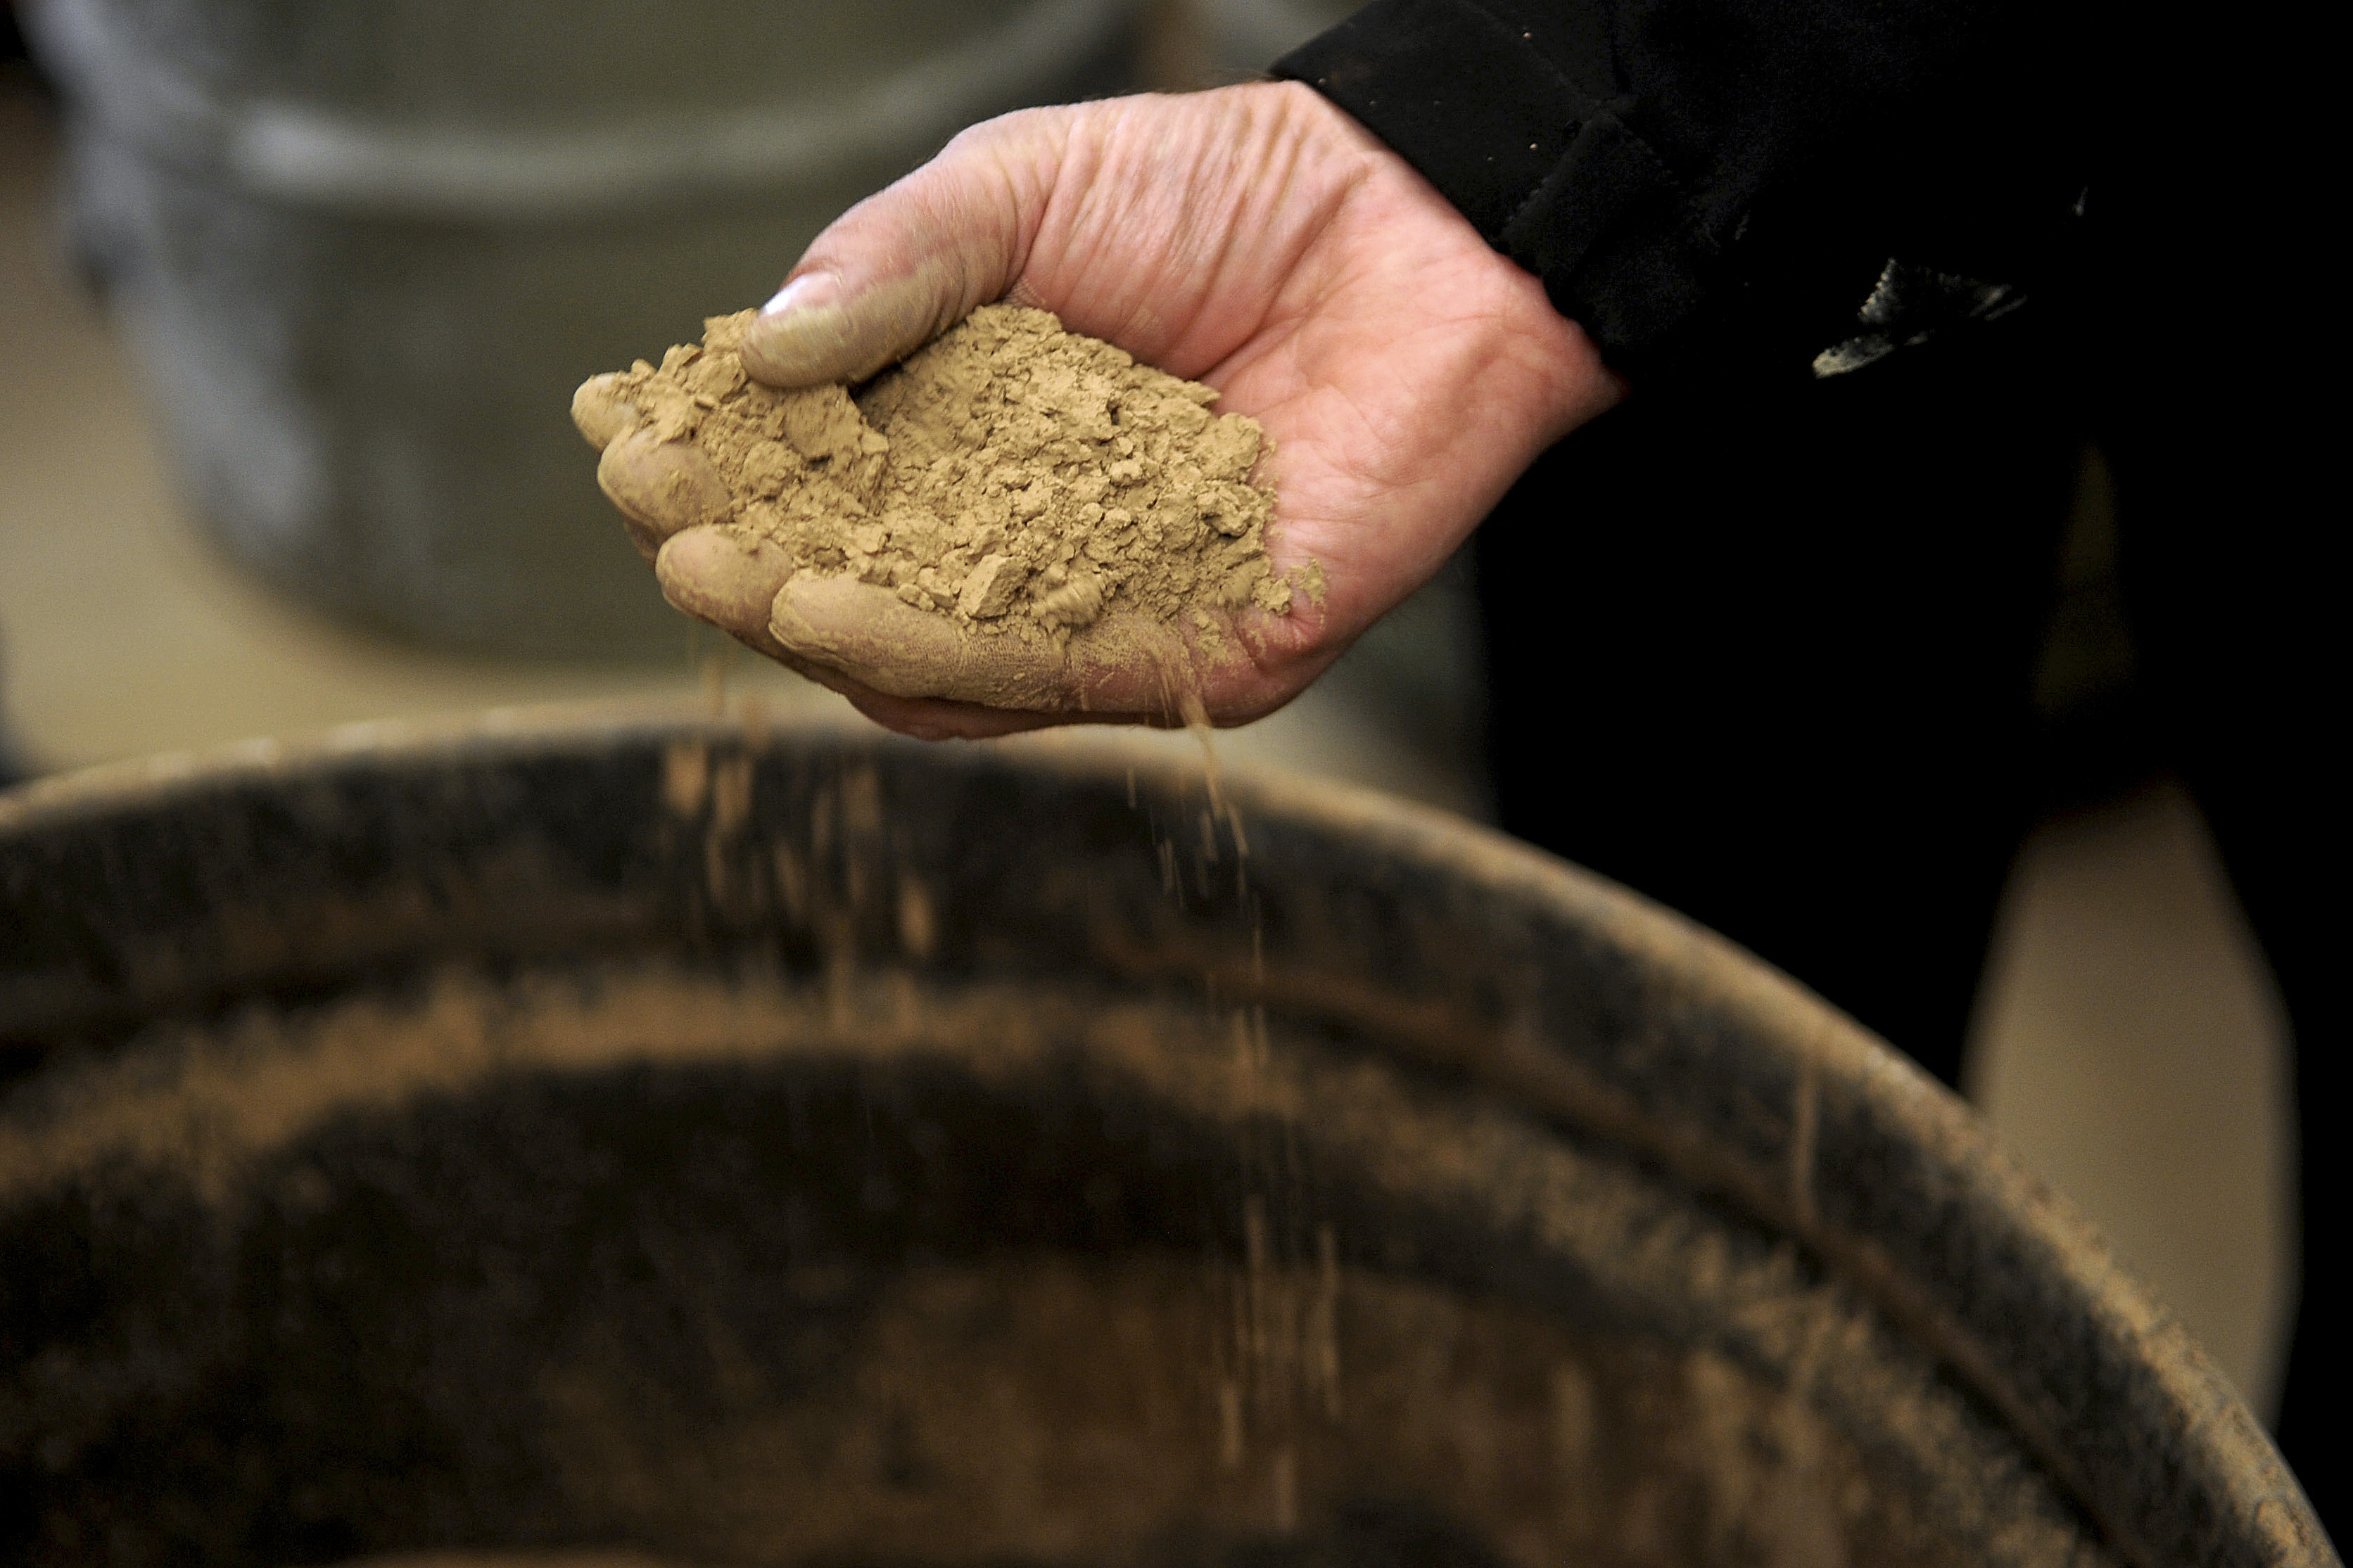 Molycorp mines rare earth elements. (Bloomberg&mdash;Bloomberg via Getty Images)